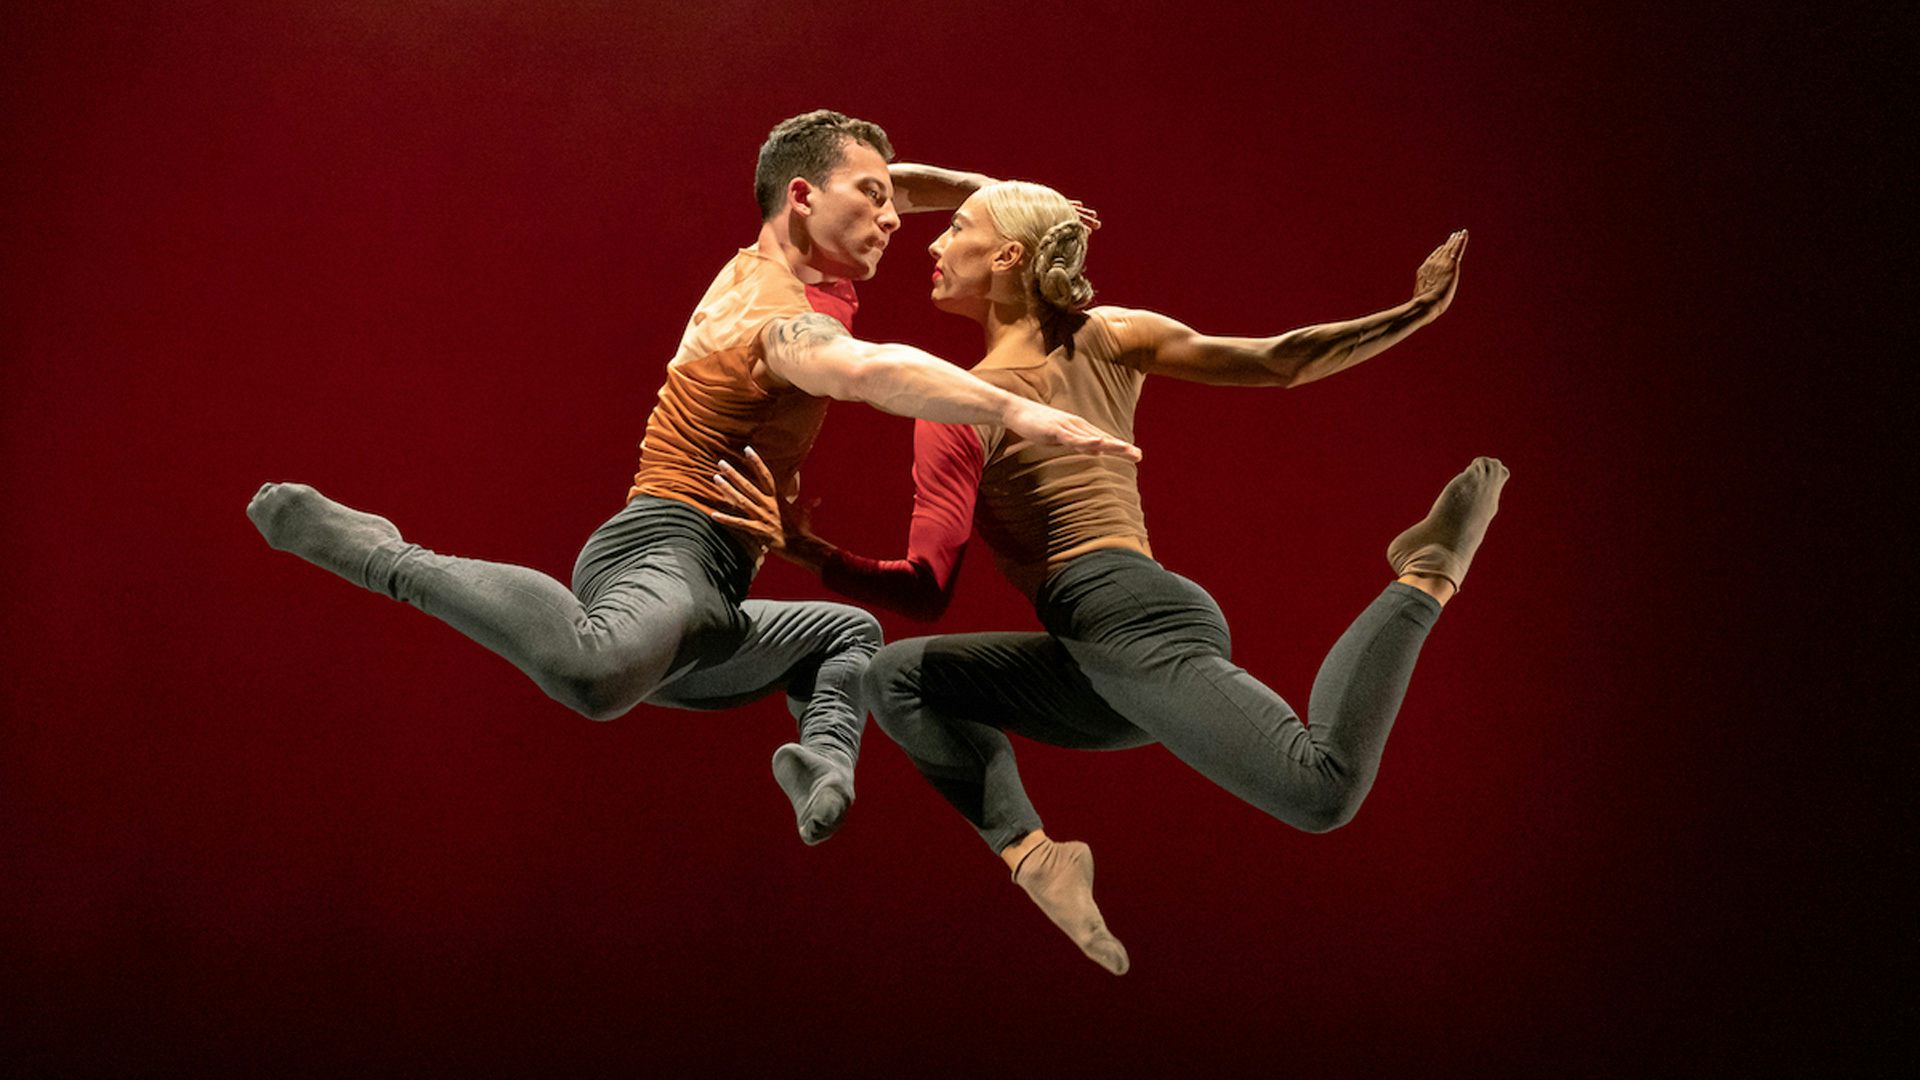 Two people jumping in the air and holding onto one another against a dark red background